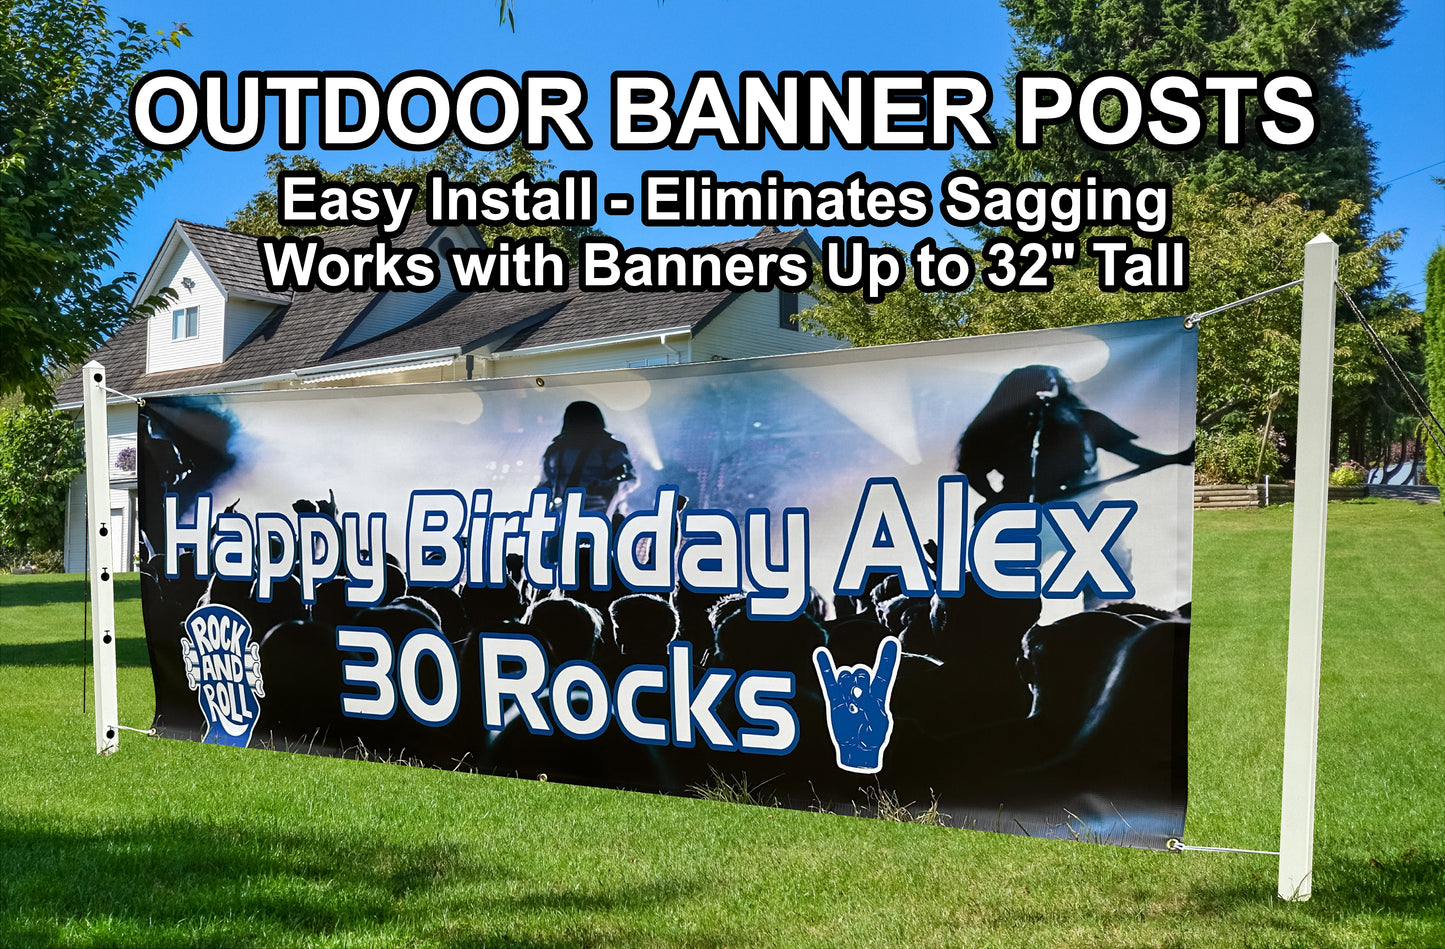 HAPPY BIRTHDAY BANNER, 4 Sizes, Custom Personalized Vinyl Indoor/Outdoor Party Celebration Decoration, Personalize Name and Age, CB117